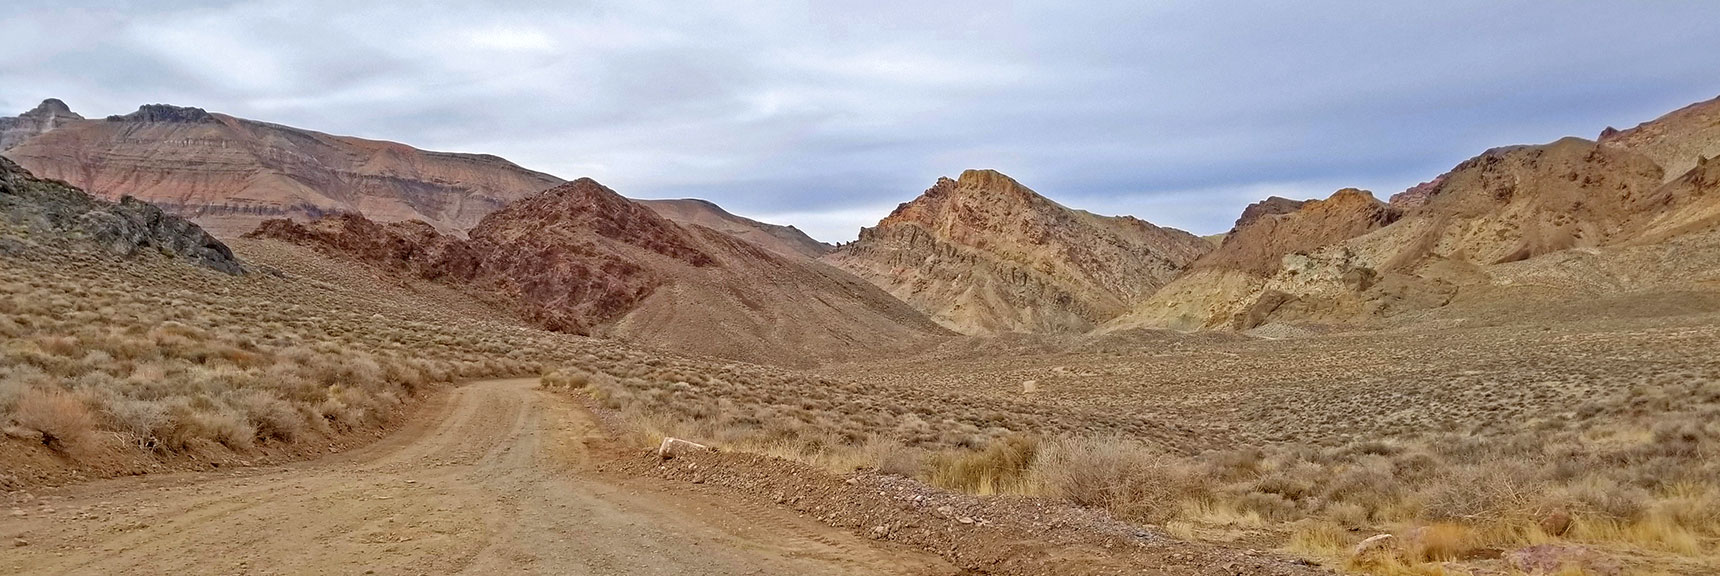 Beginning to Navigate Through the Grapevine Mountains Toward Titus Canyon Entrance. | Titus Canyon Grand Loop by Mountain Bike | Death Valley National Park, California